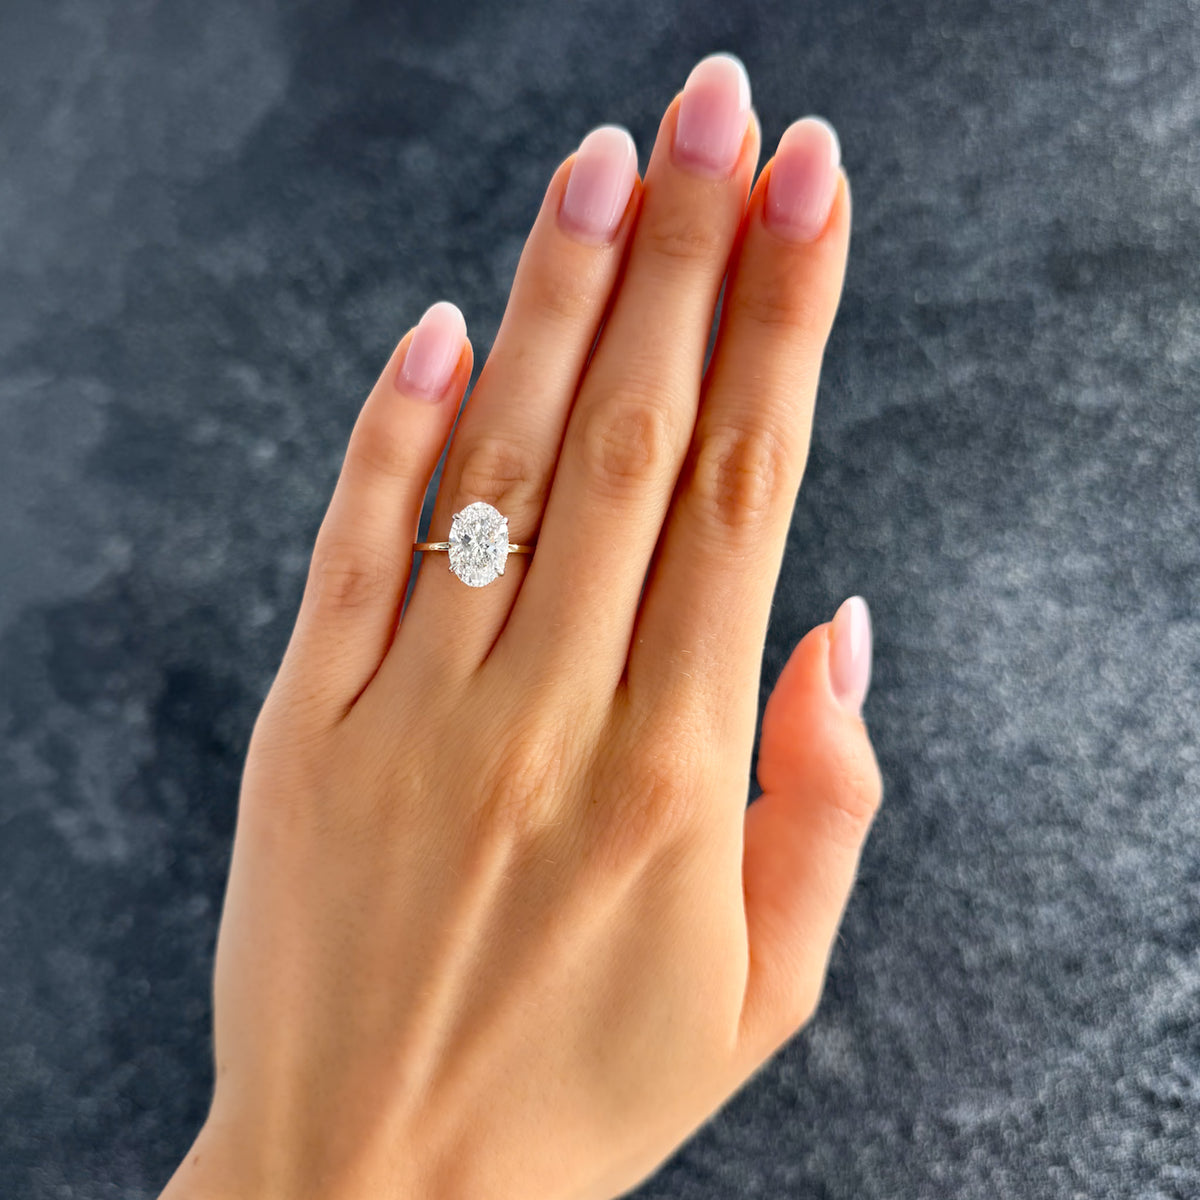 Thin + Simple Solitaire Engagement Ring With Oval Cut Diamond